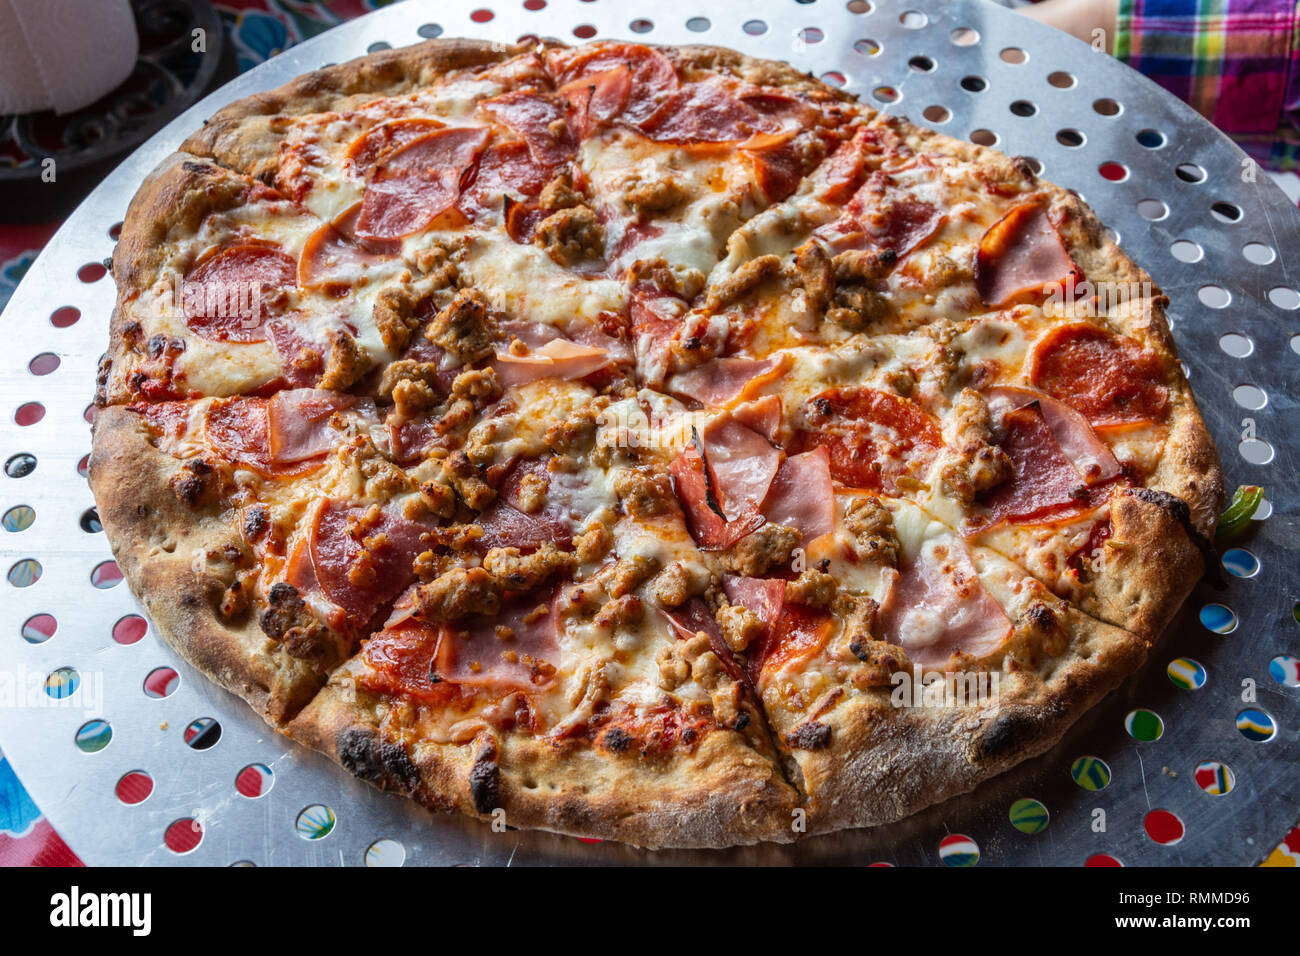 Pizza pepperoni on a tray Stock Photo